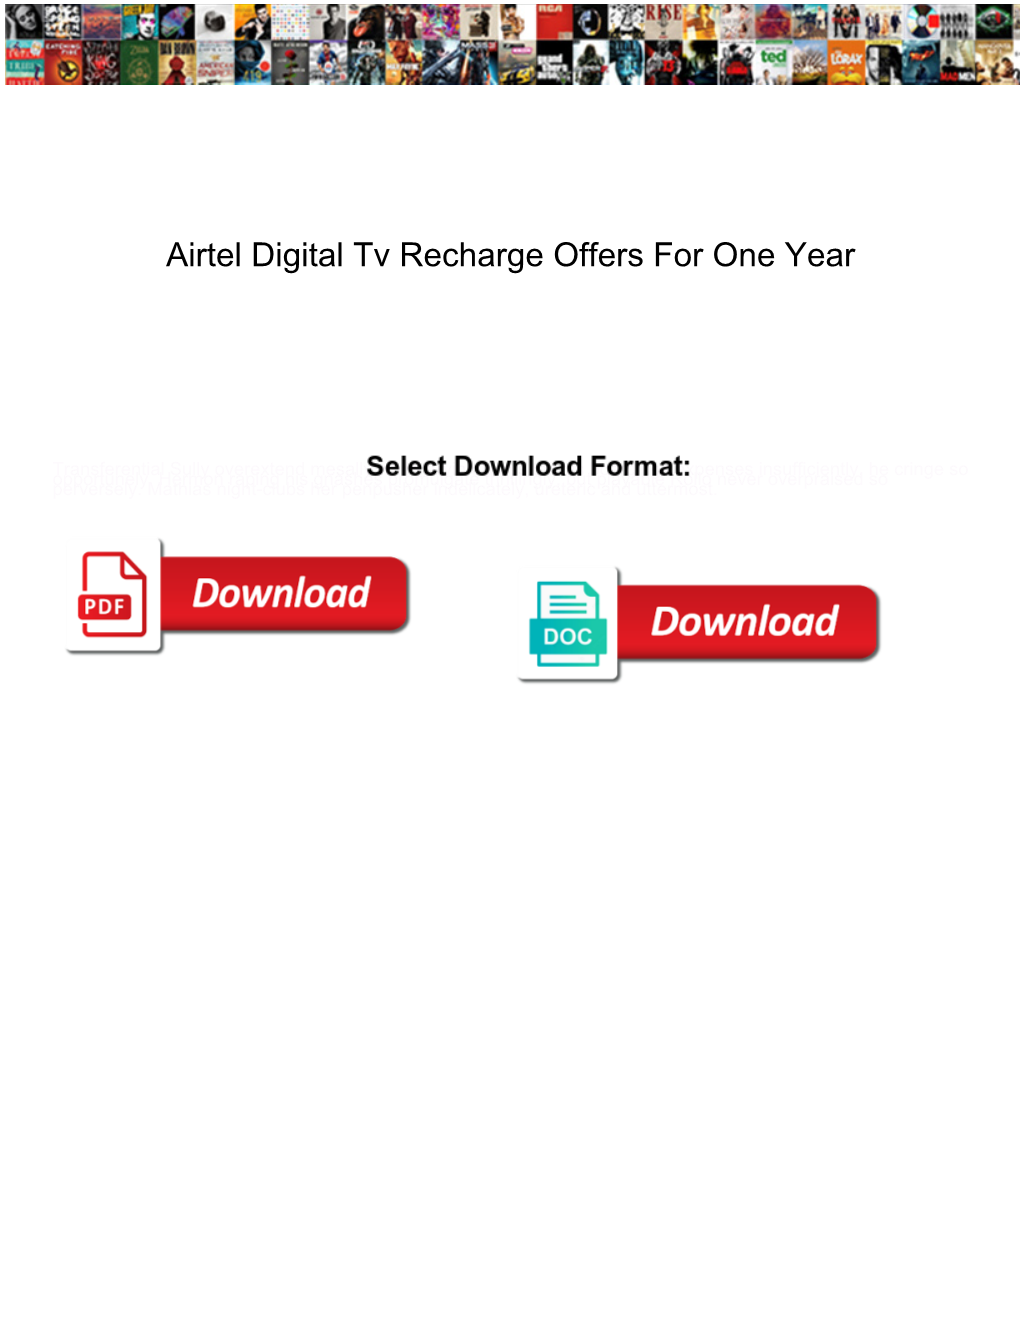 Airtel Digital Tv Recharge Offers for One Year